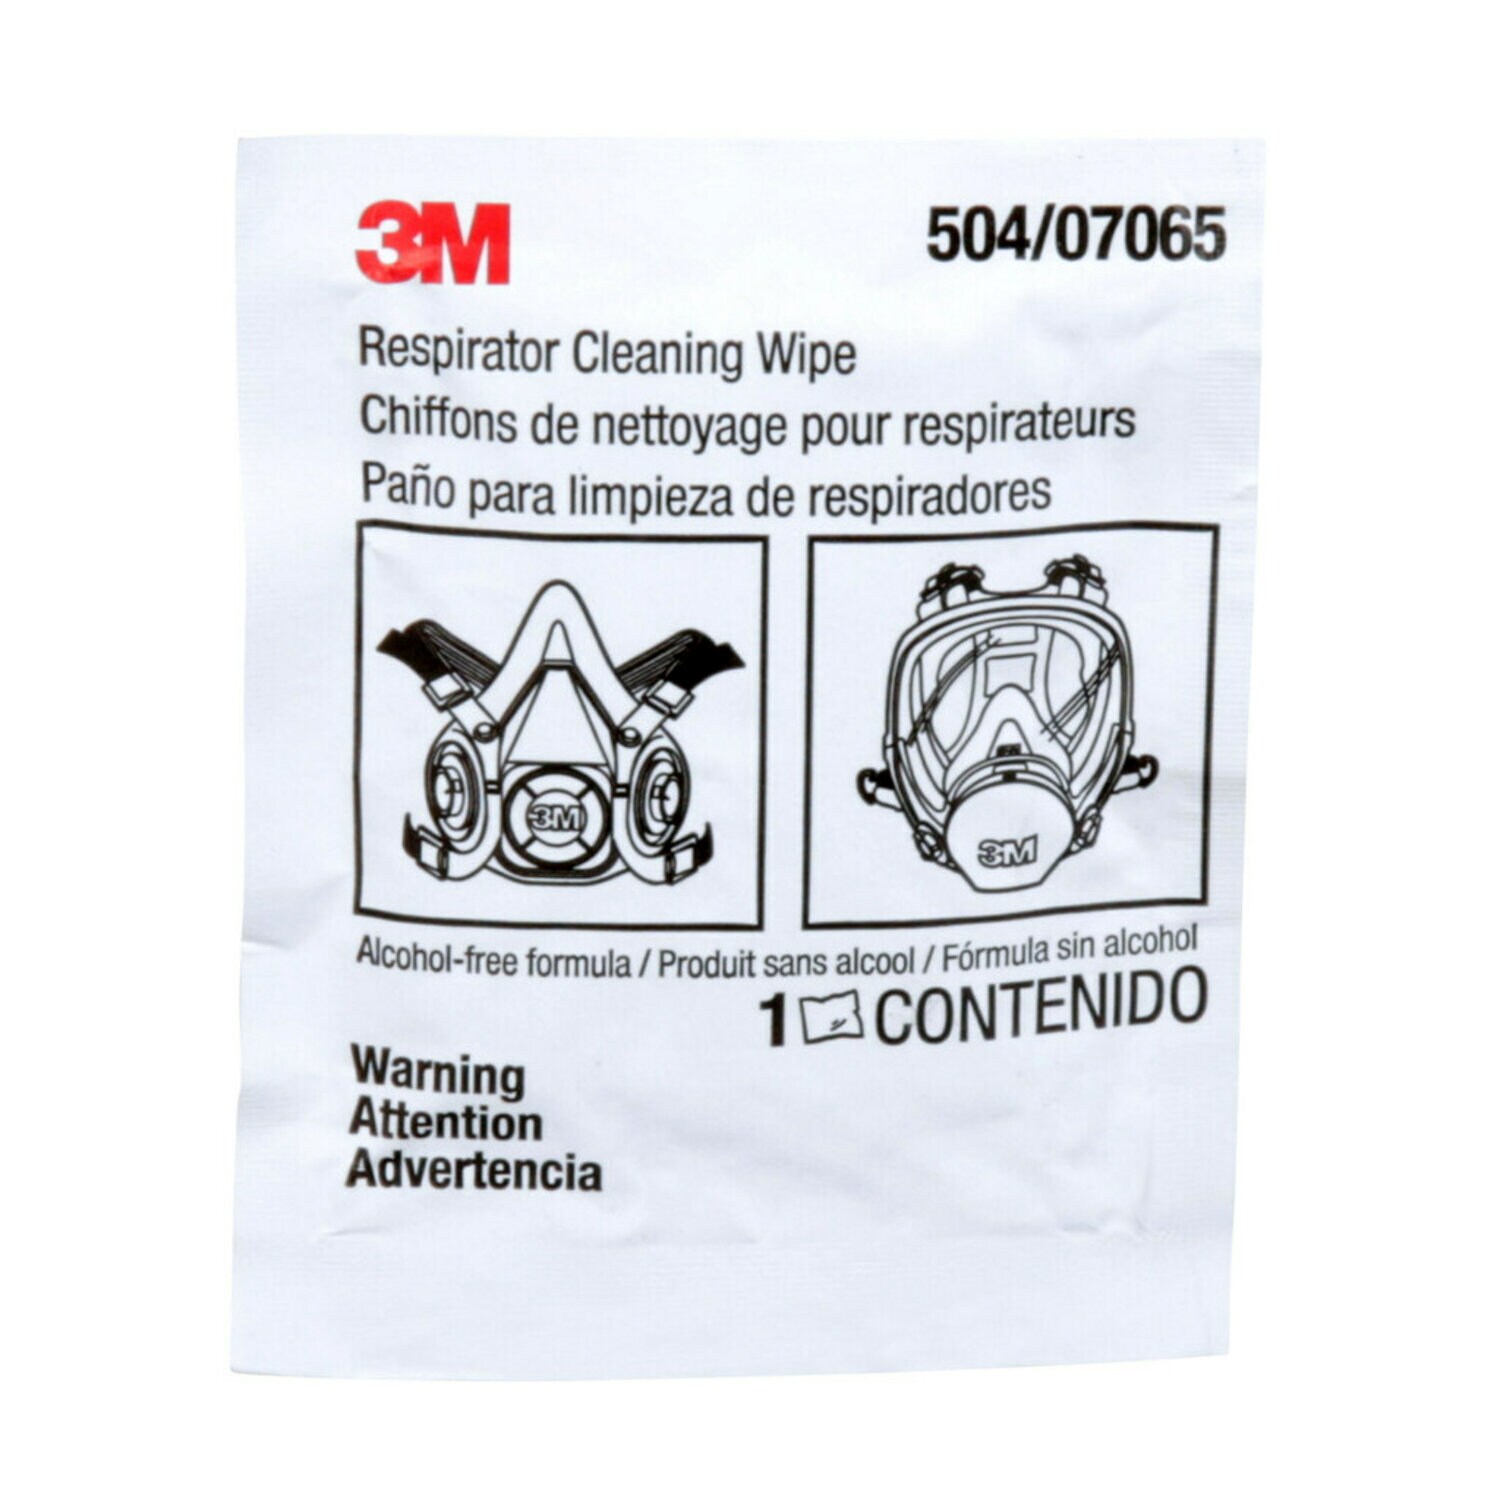 7000001938 - 3M Respirator Cleaning Wipe 504/07065(AAD), 500 EA/Case